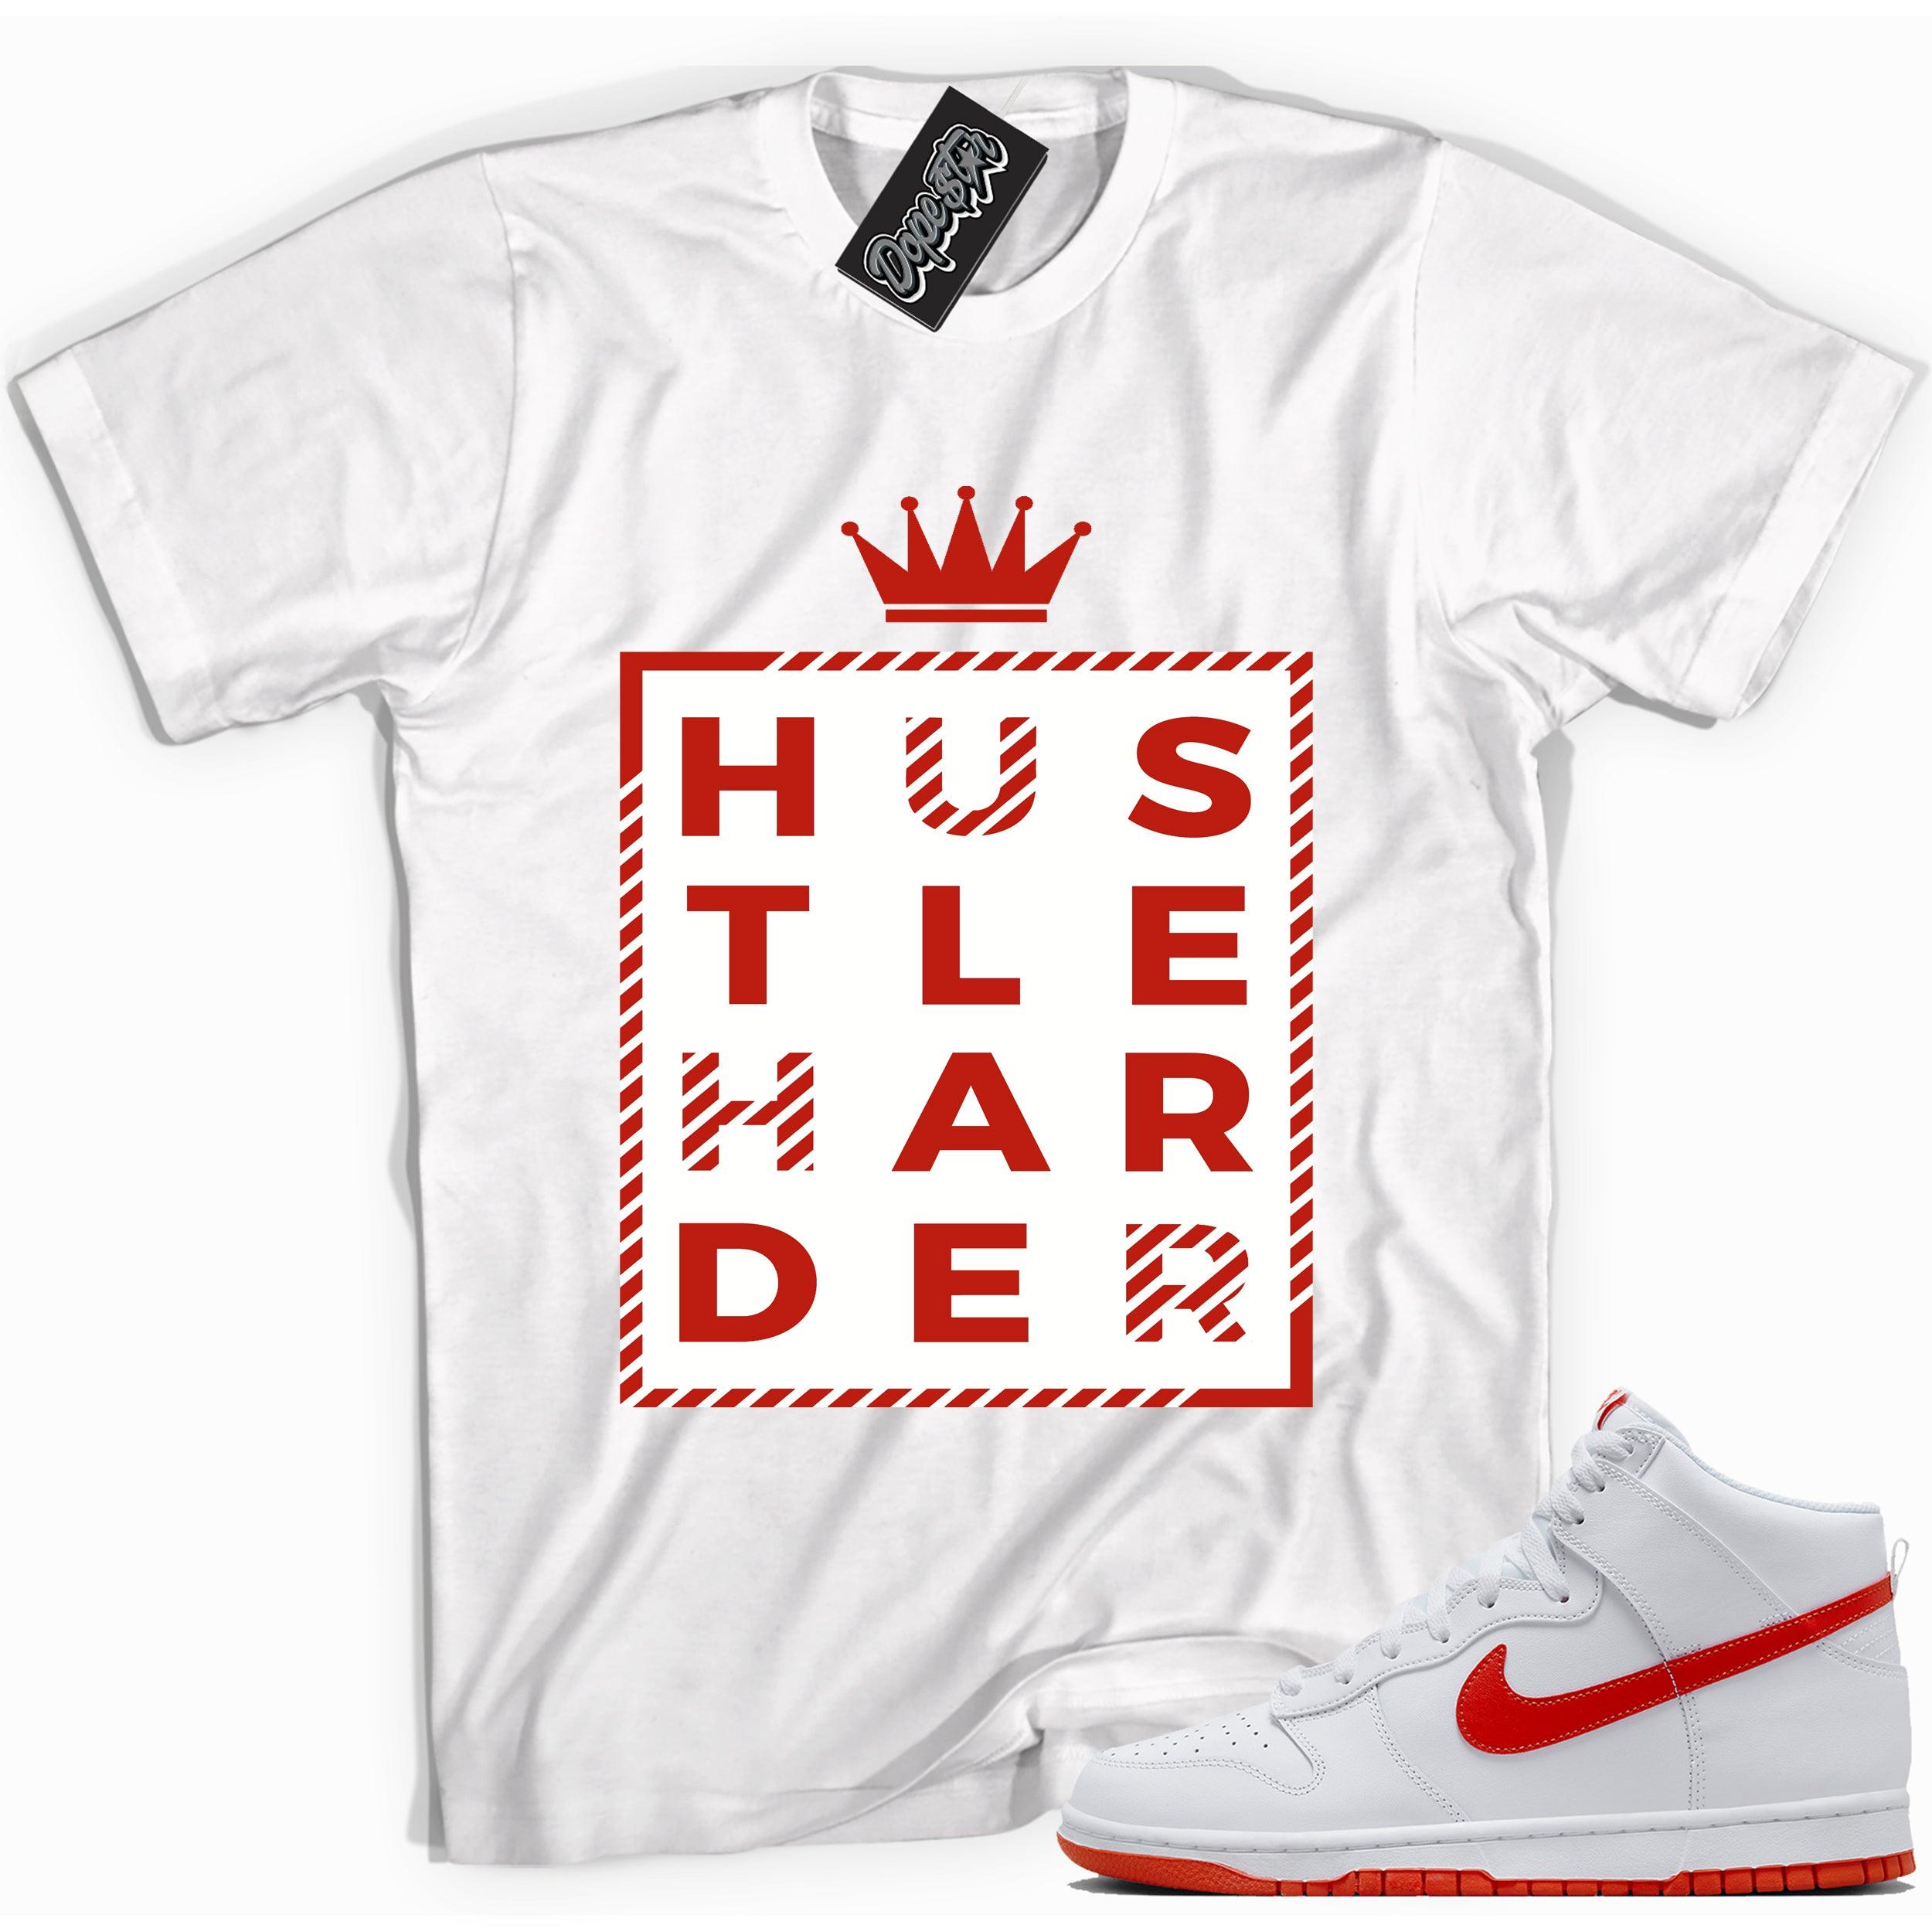 Cool white graphic tee with 'hustle harder' print, that perfectly matches Nike Dunk High White Picante Red sneakers.